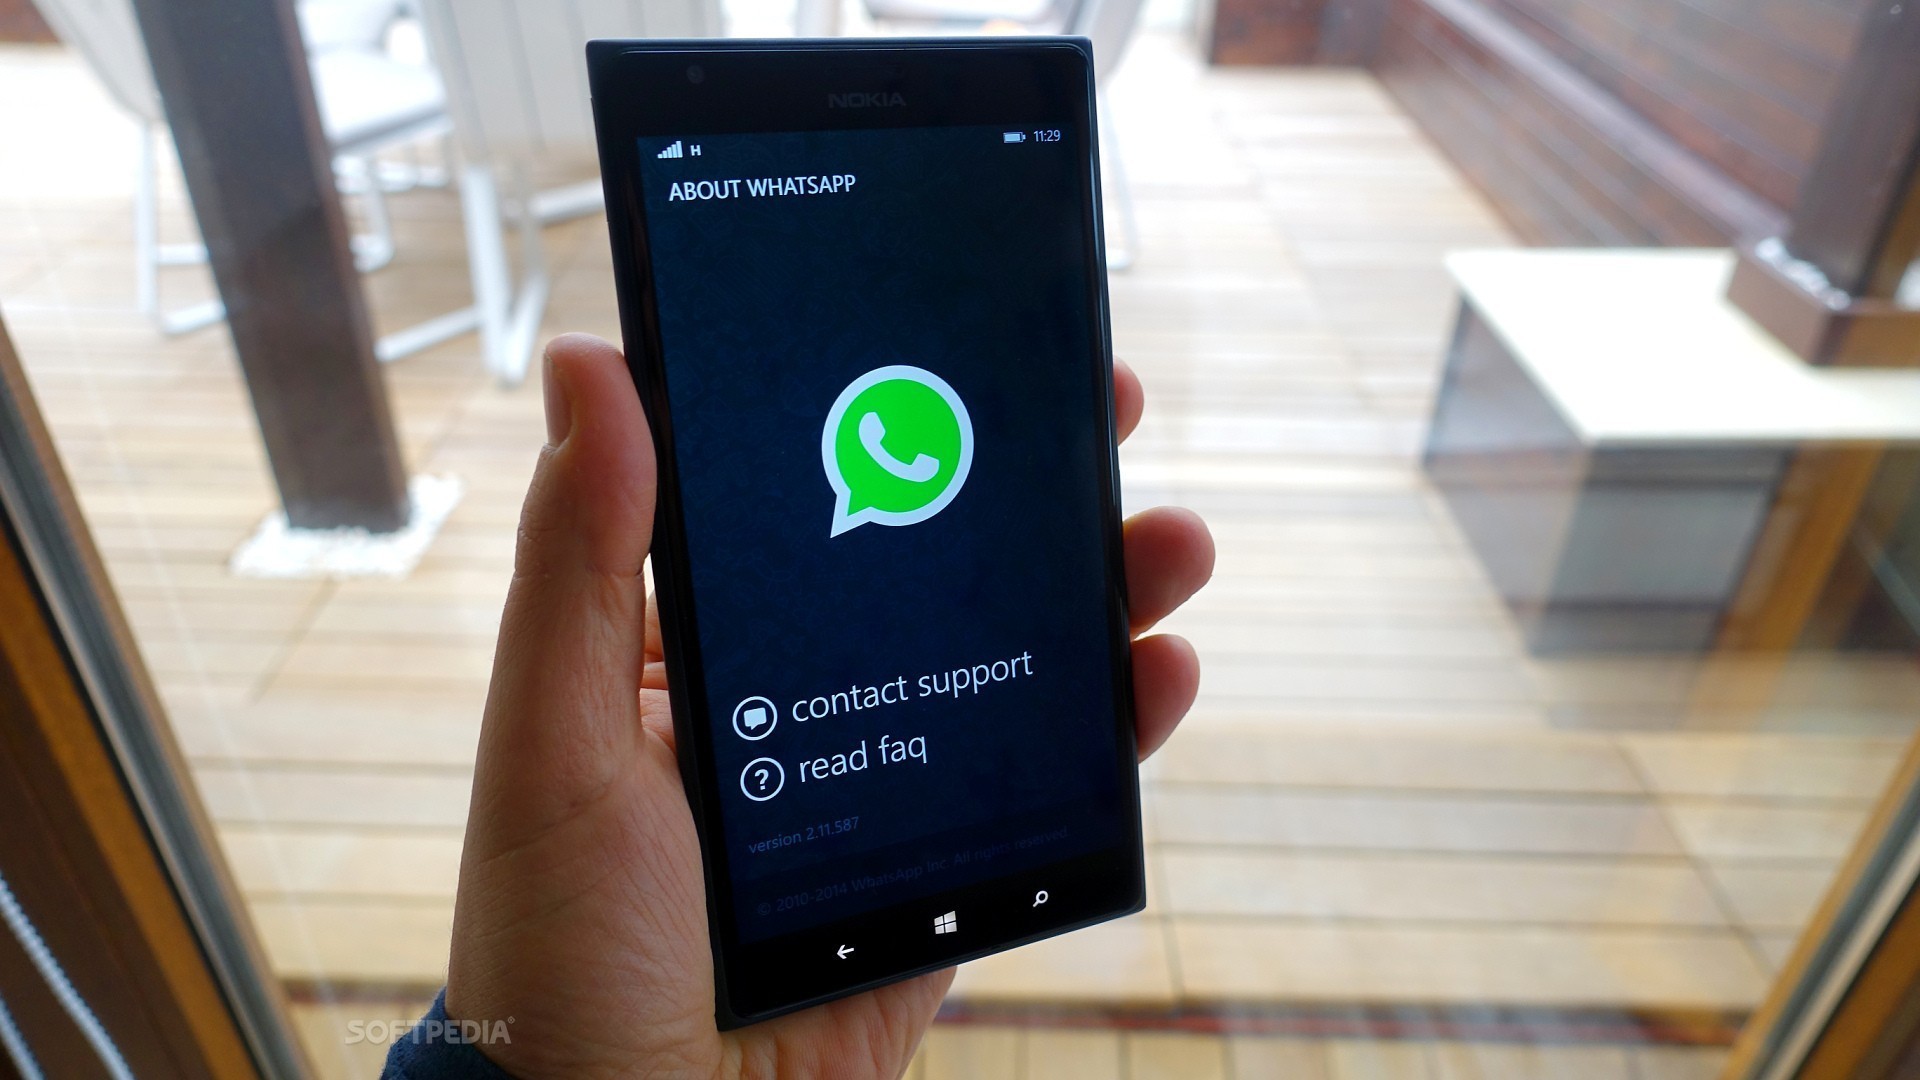 WhatsApp will end its App support for Windows Phone 7.1